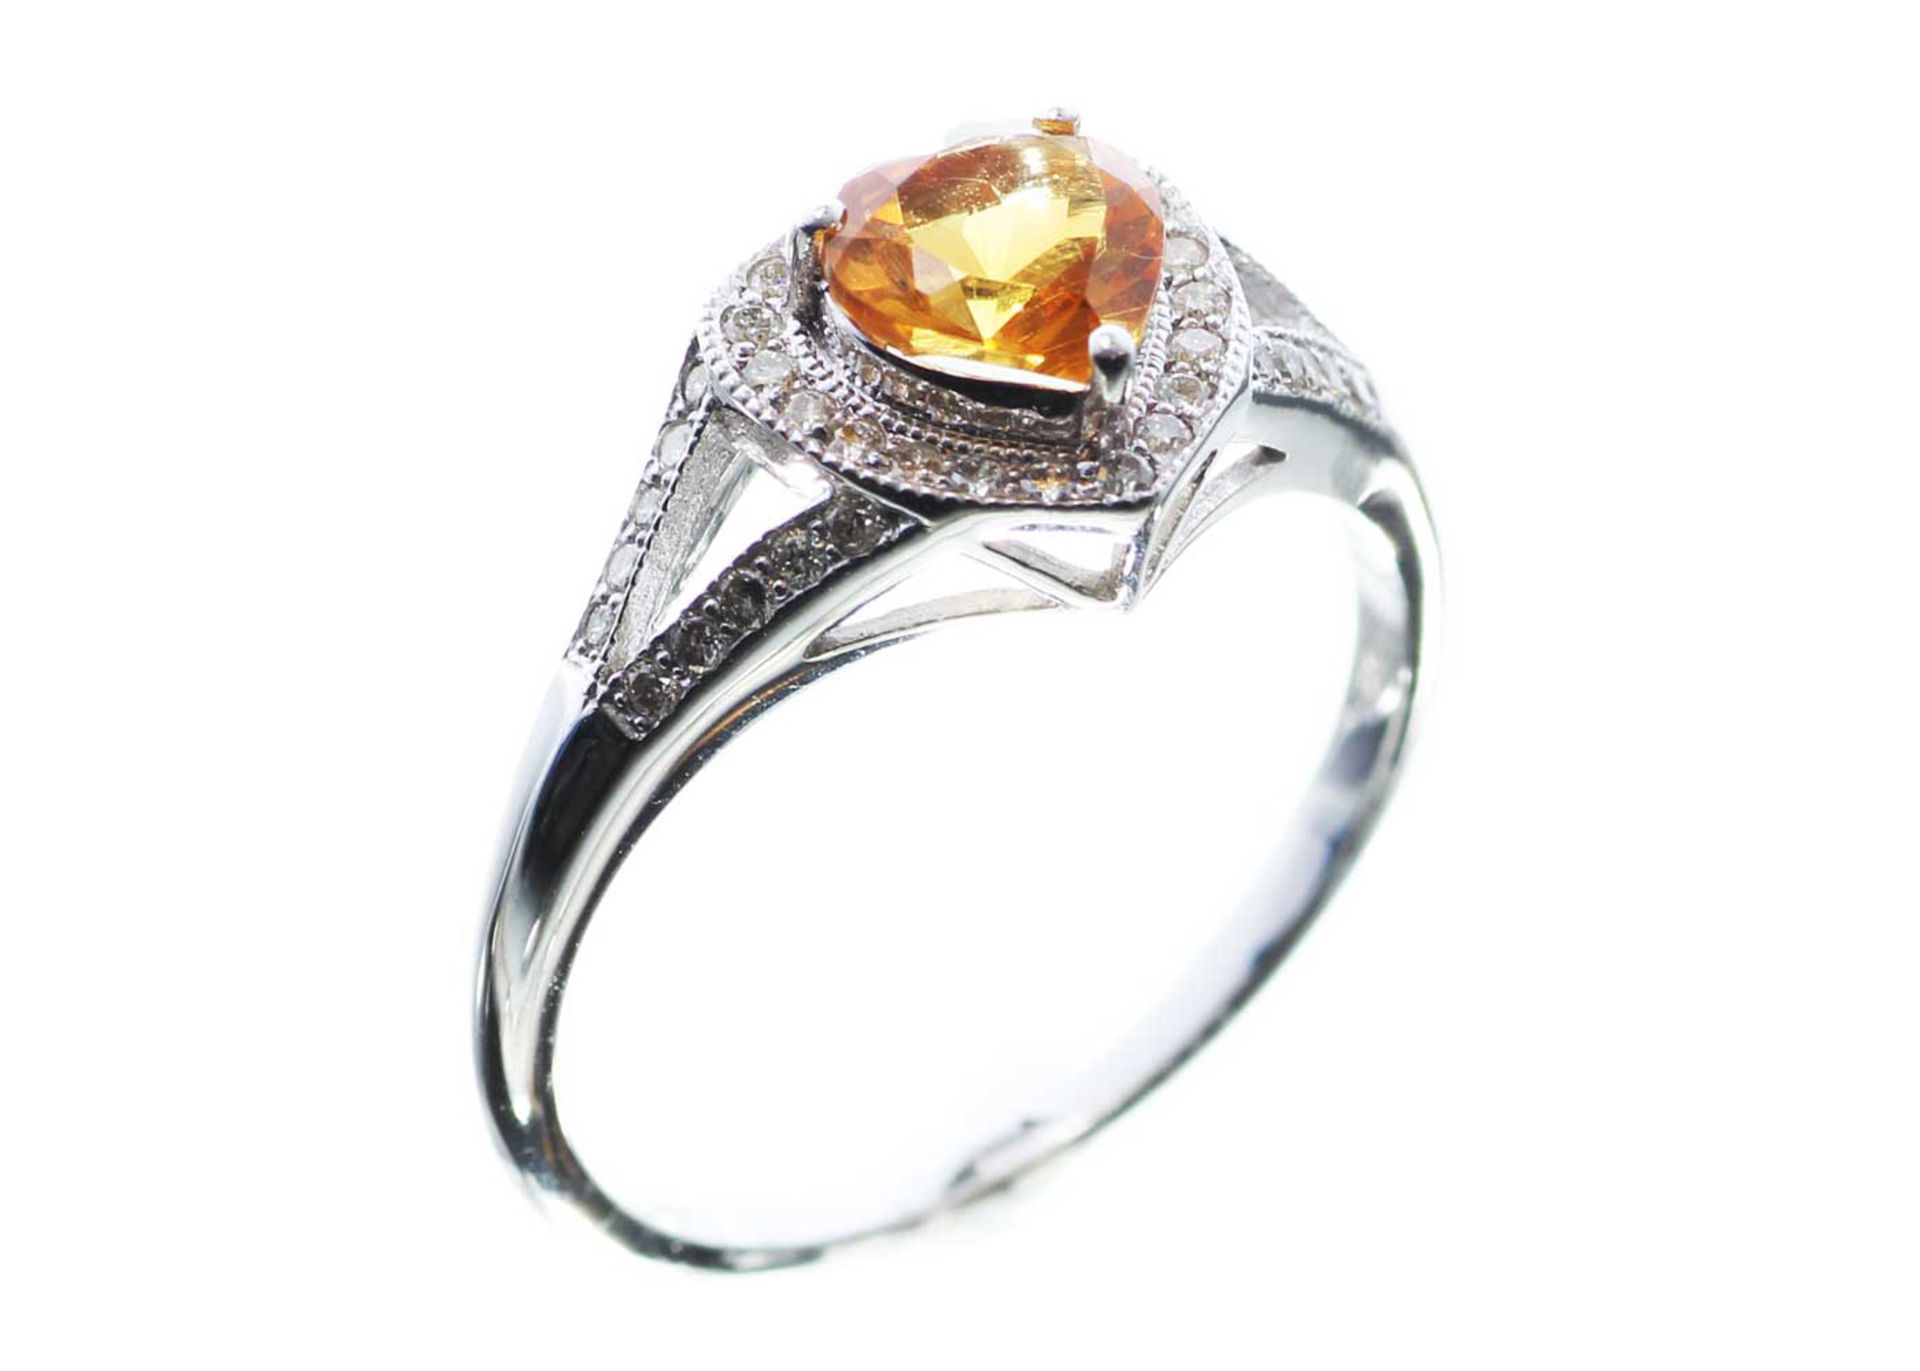 9ct White Gold Heart Shape Citrine Diamond Ring 0.20 Carats - Valued by AGI £1,495.00 - 9ct White - Image 2 of 4